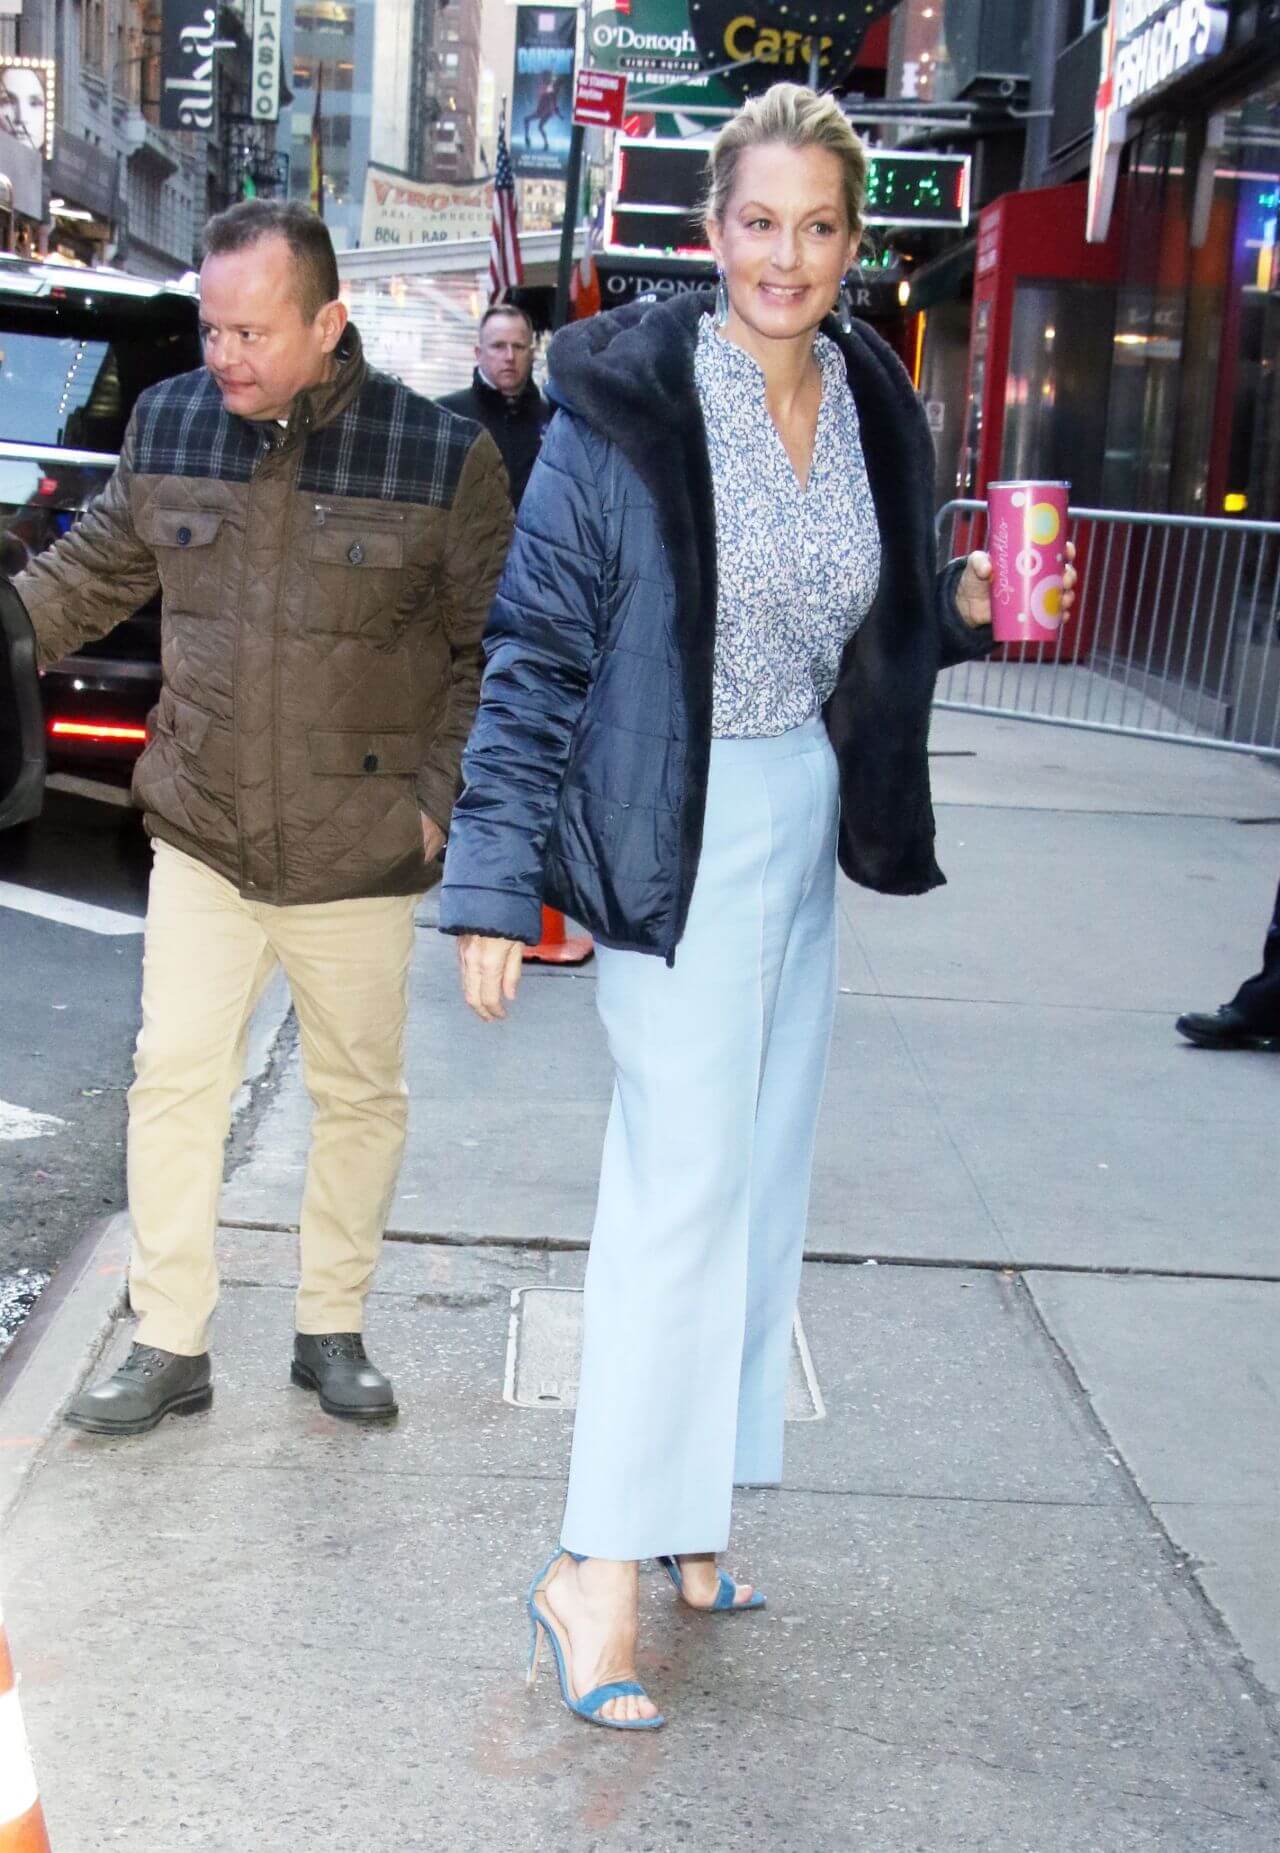 Ali Wentworth  -  In White Printed Top & Blue Bomber Jacket With Pants - At Good Morning America in New York